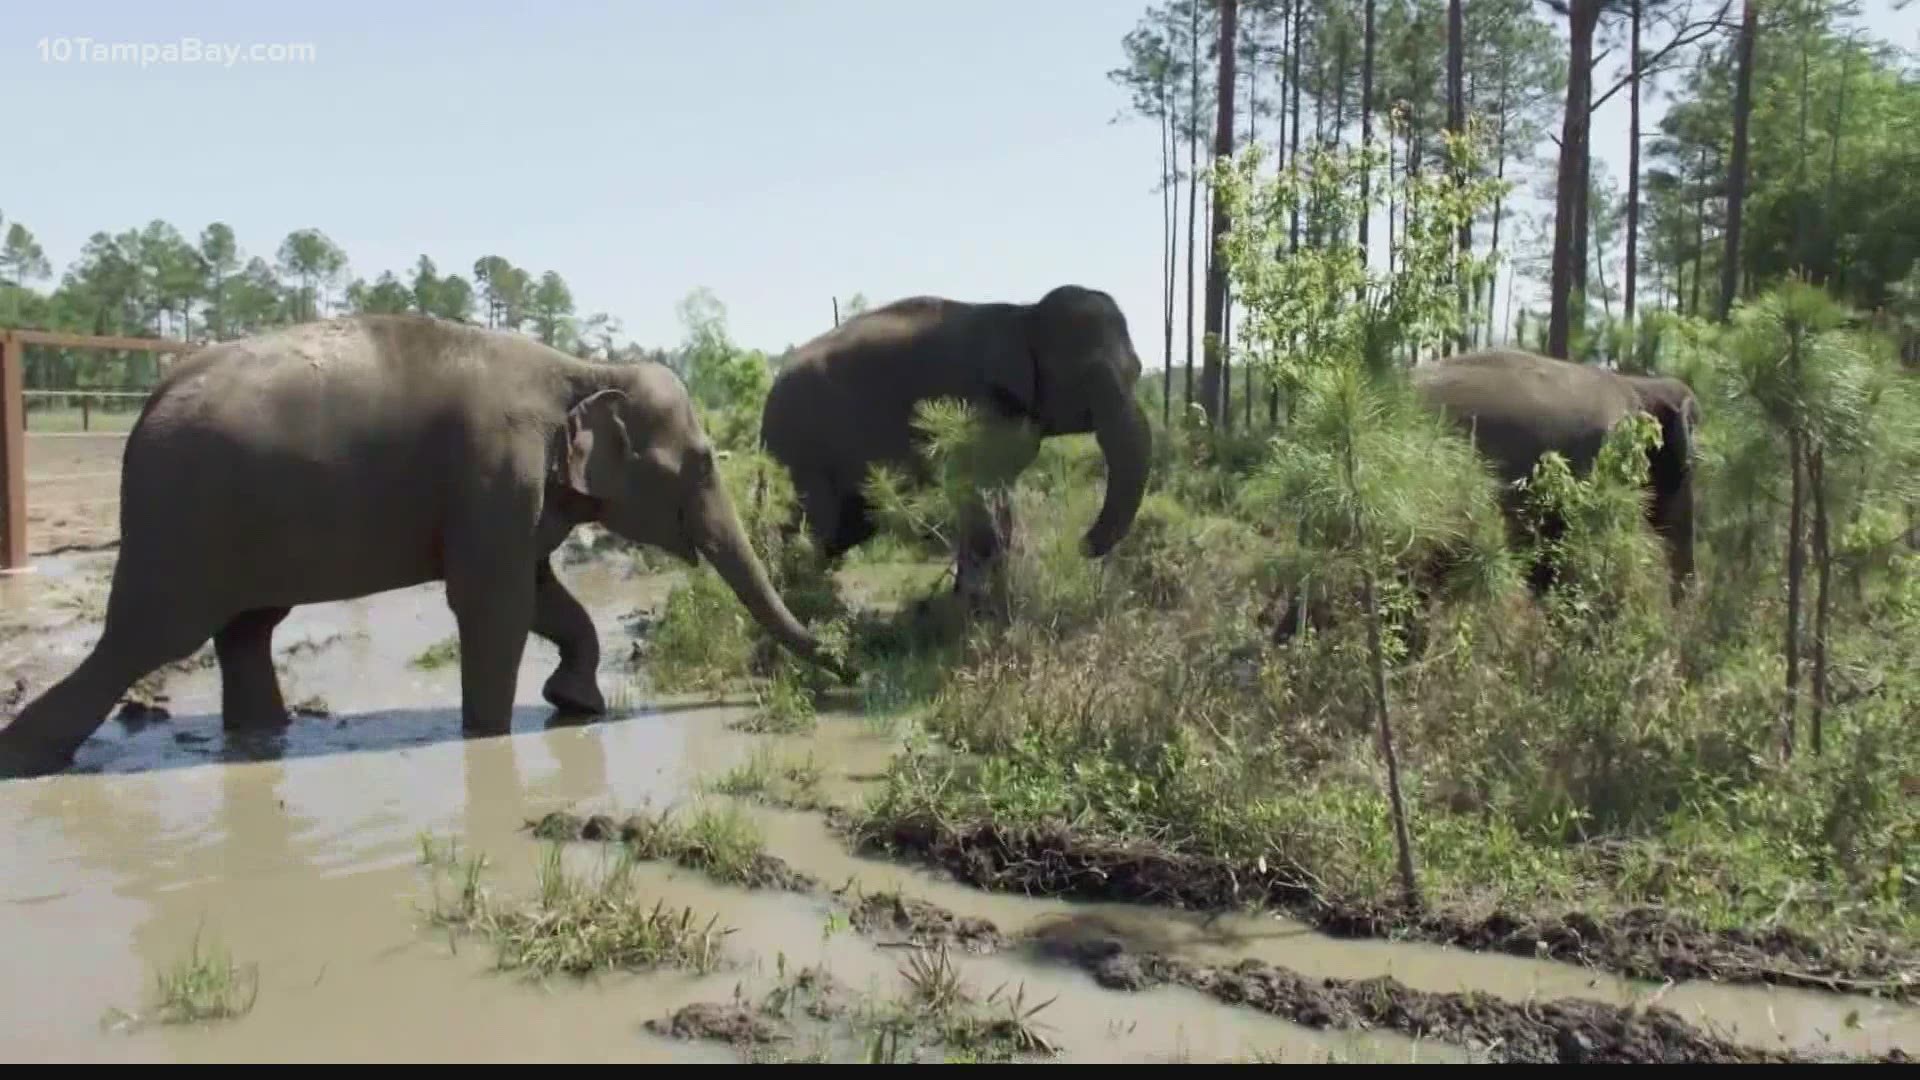 The majestic giants will now get to call the 2,500-acre refuge in Yulee home.